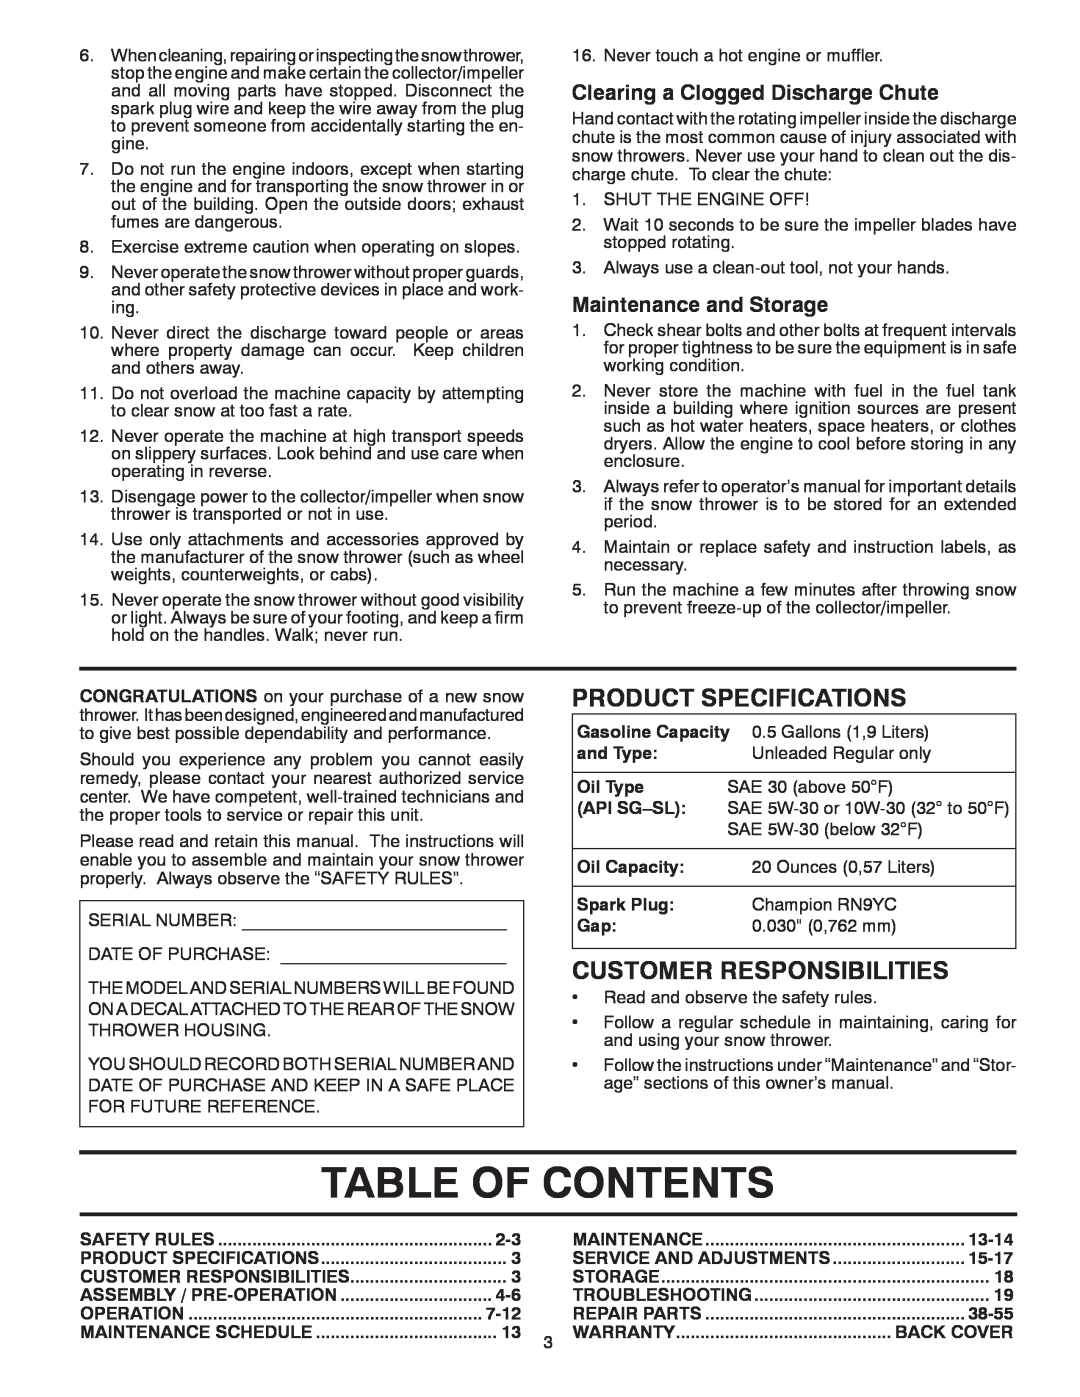 Poulan 428707 Table Of Contents, Product Specifications, Customer Responsibilities, Clearing a Clogged Discharge Chute 